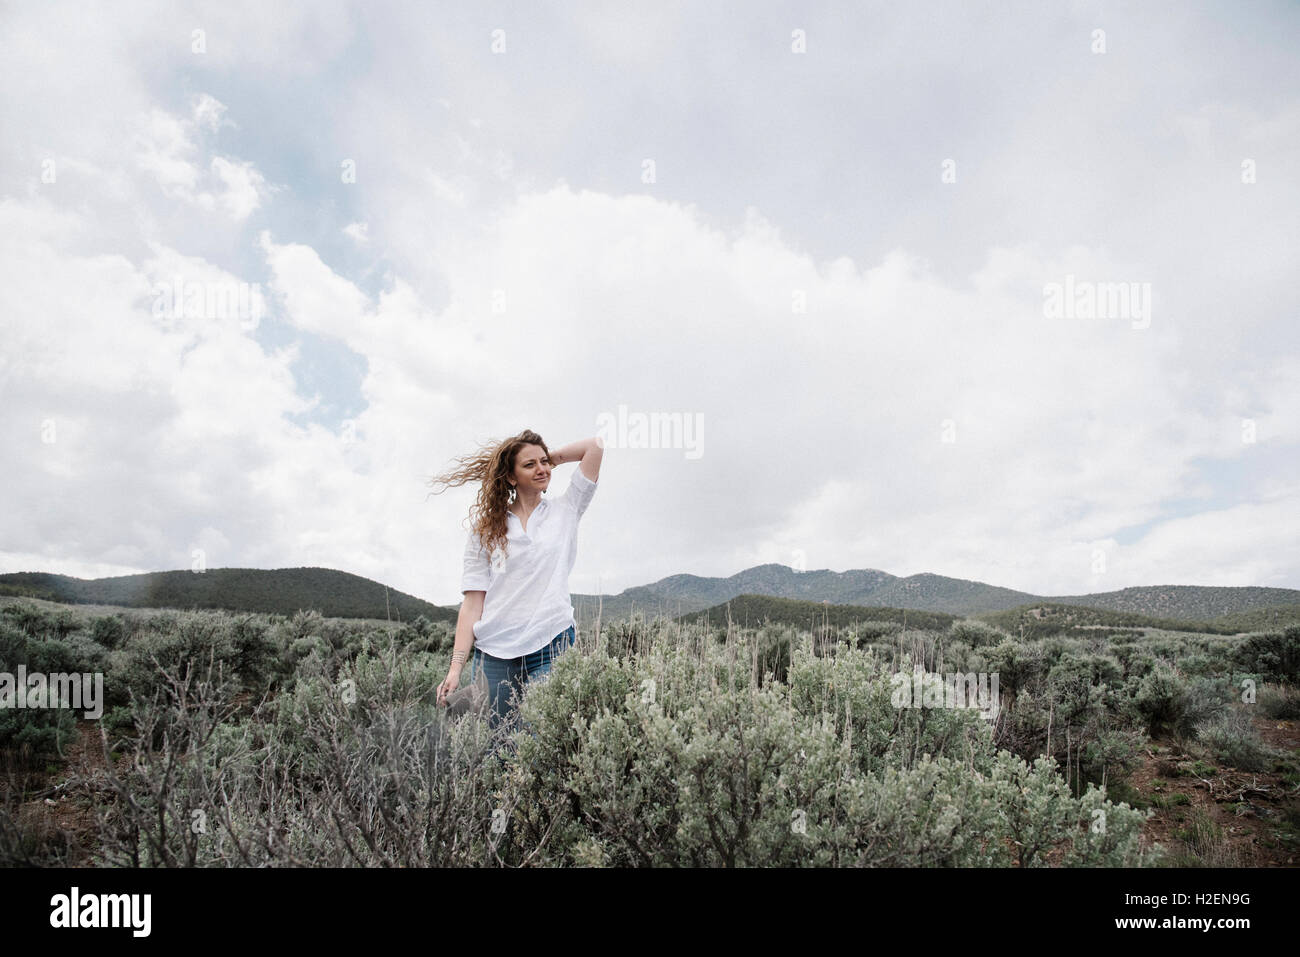 A woman standing in an open landscape with a view of mountains woodland and scrub land. Stock Photo